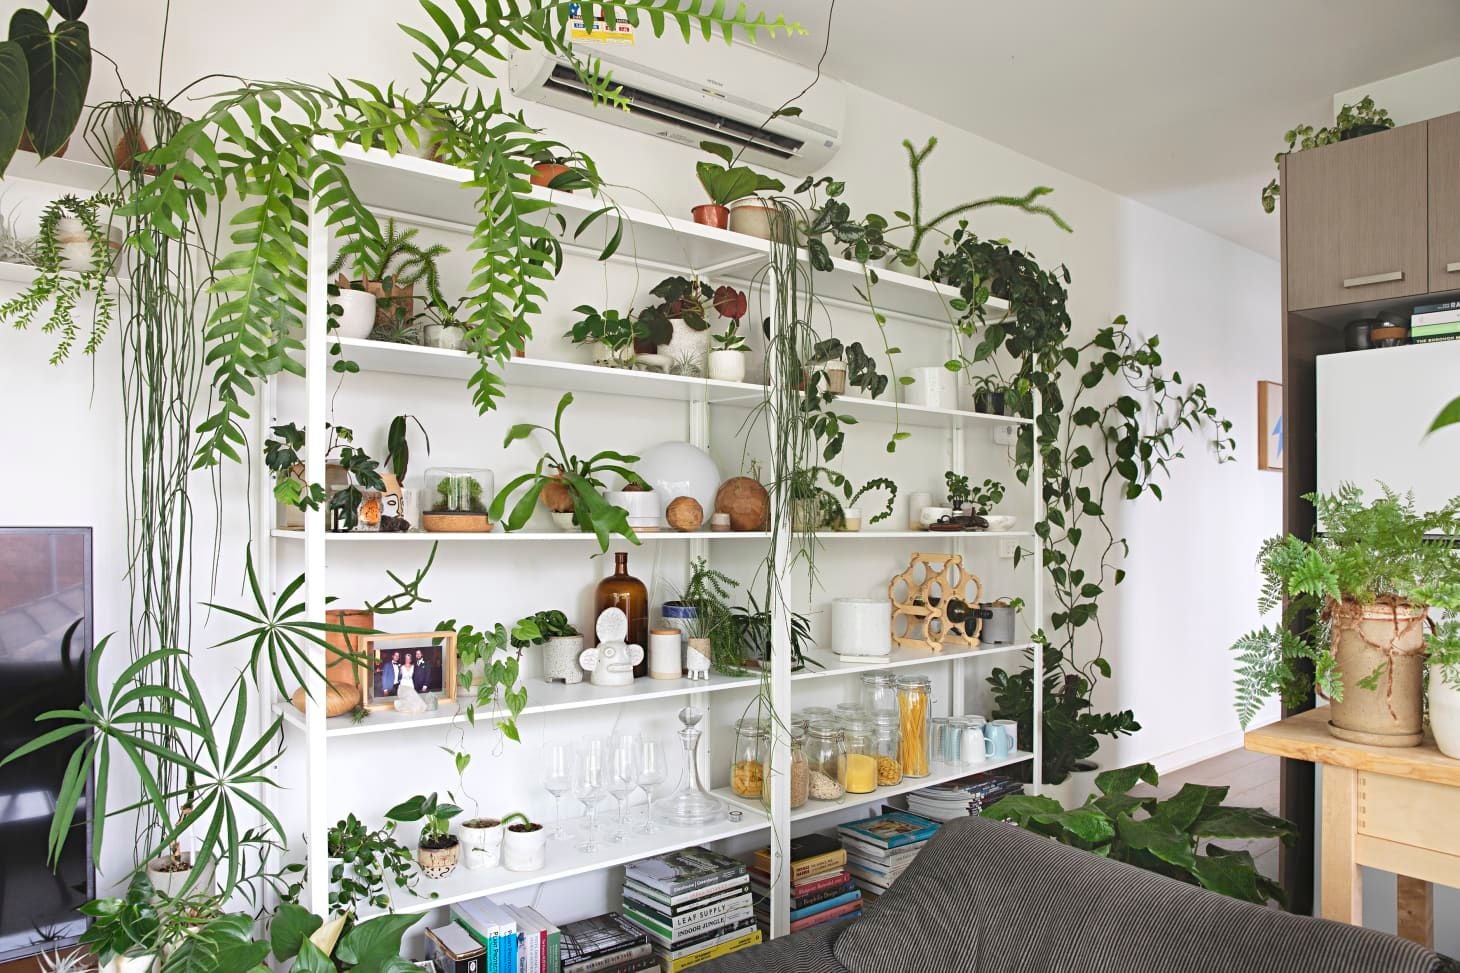 By incorporating ample greenery on a relatively out-of-the-way shelf, this interior reconnects itself to the natural world. 